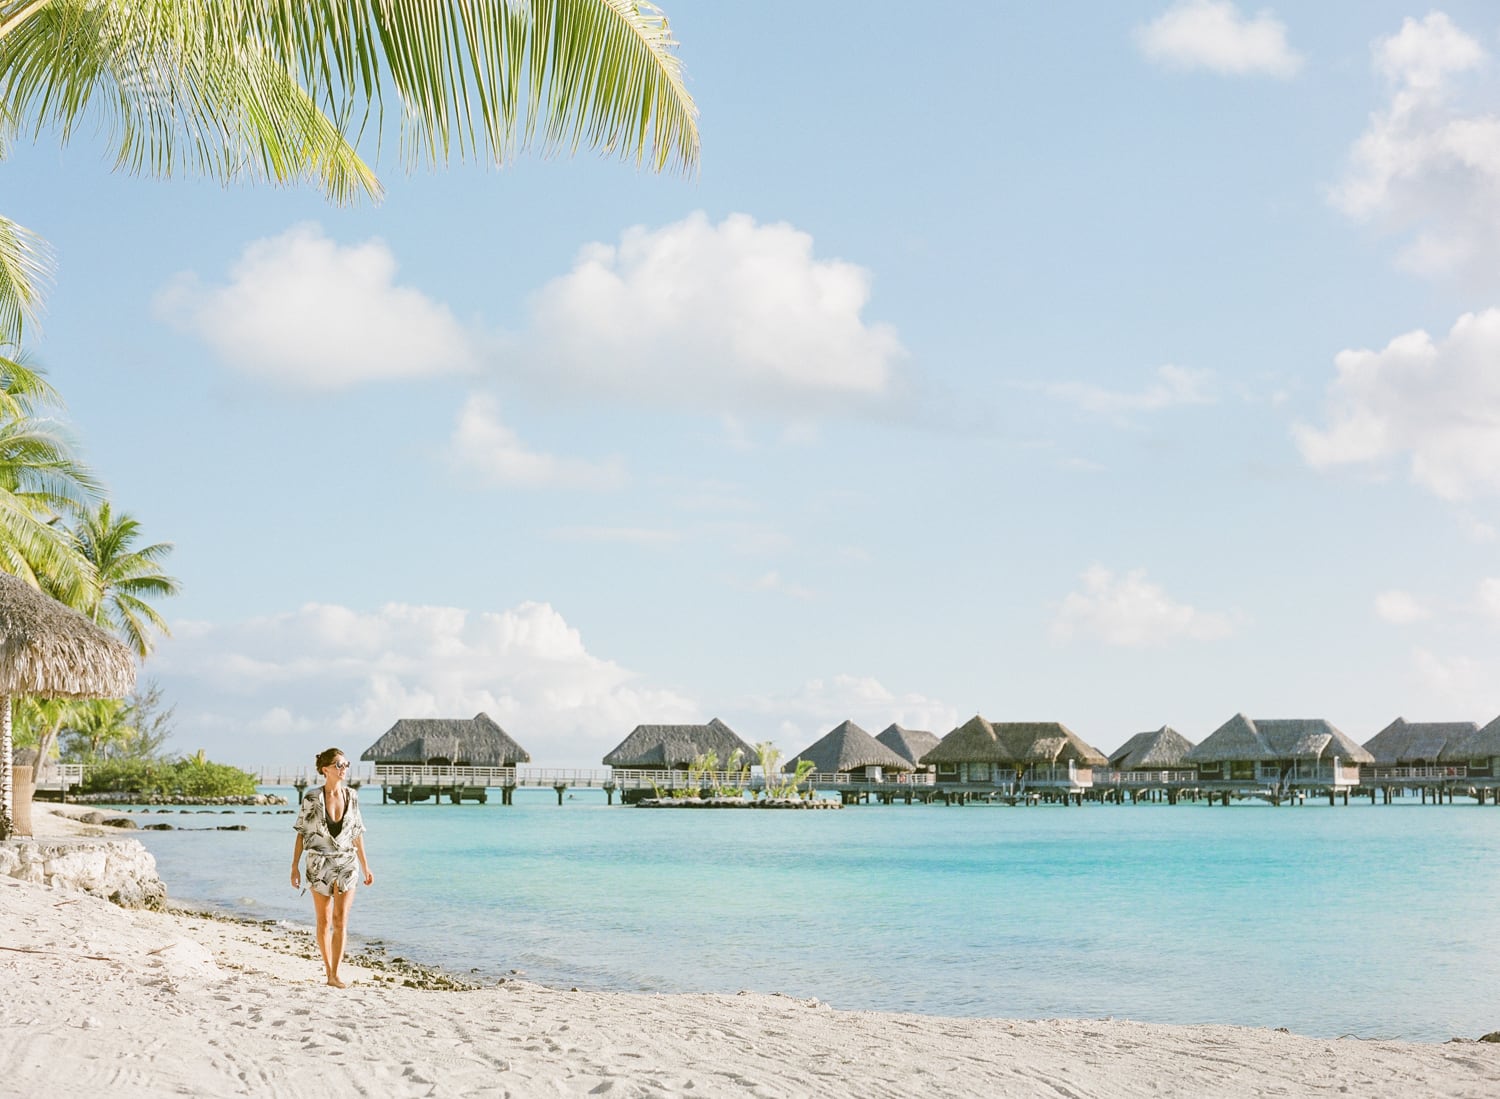 Elena walking on the beach during her photo shoot portrait session at the Intercontinental Thalasso in Bora Bora